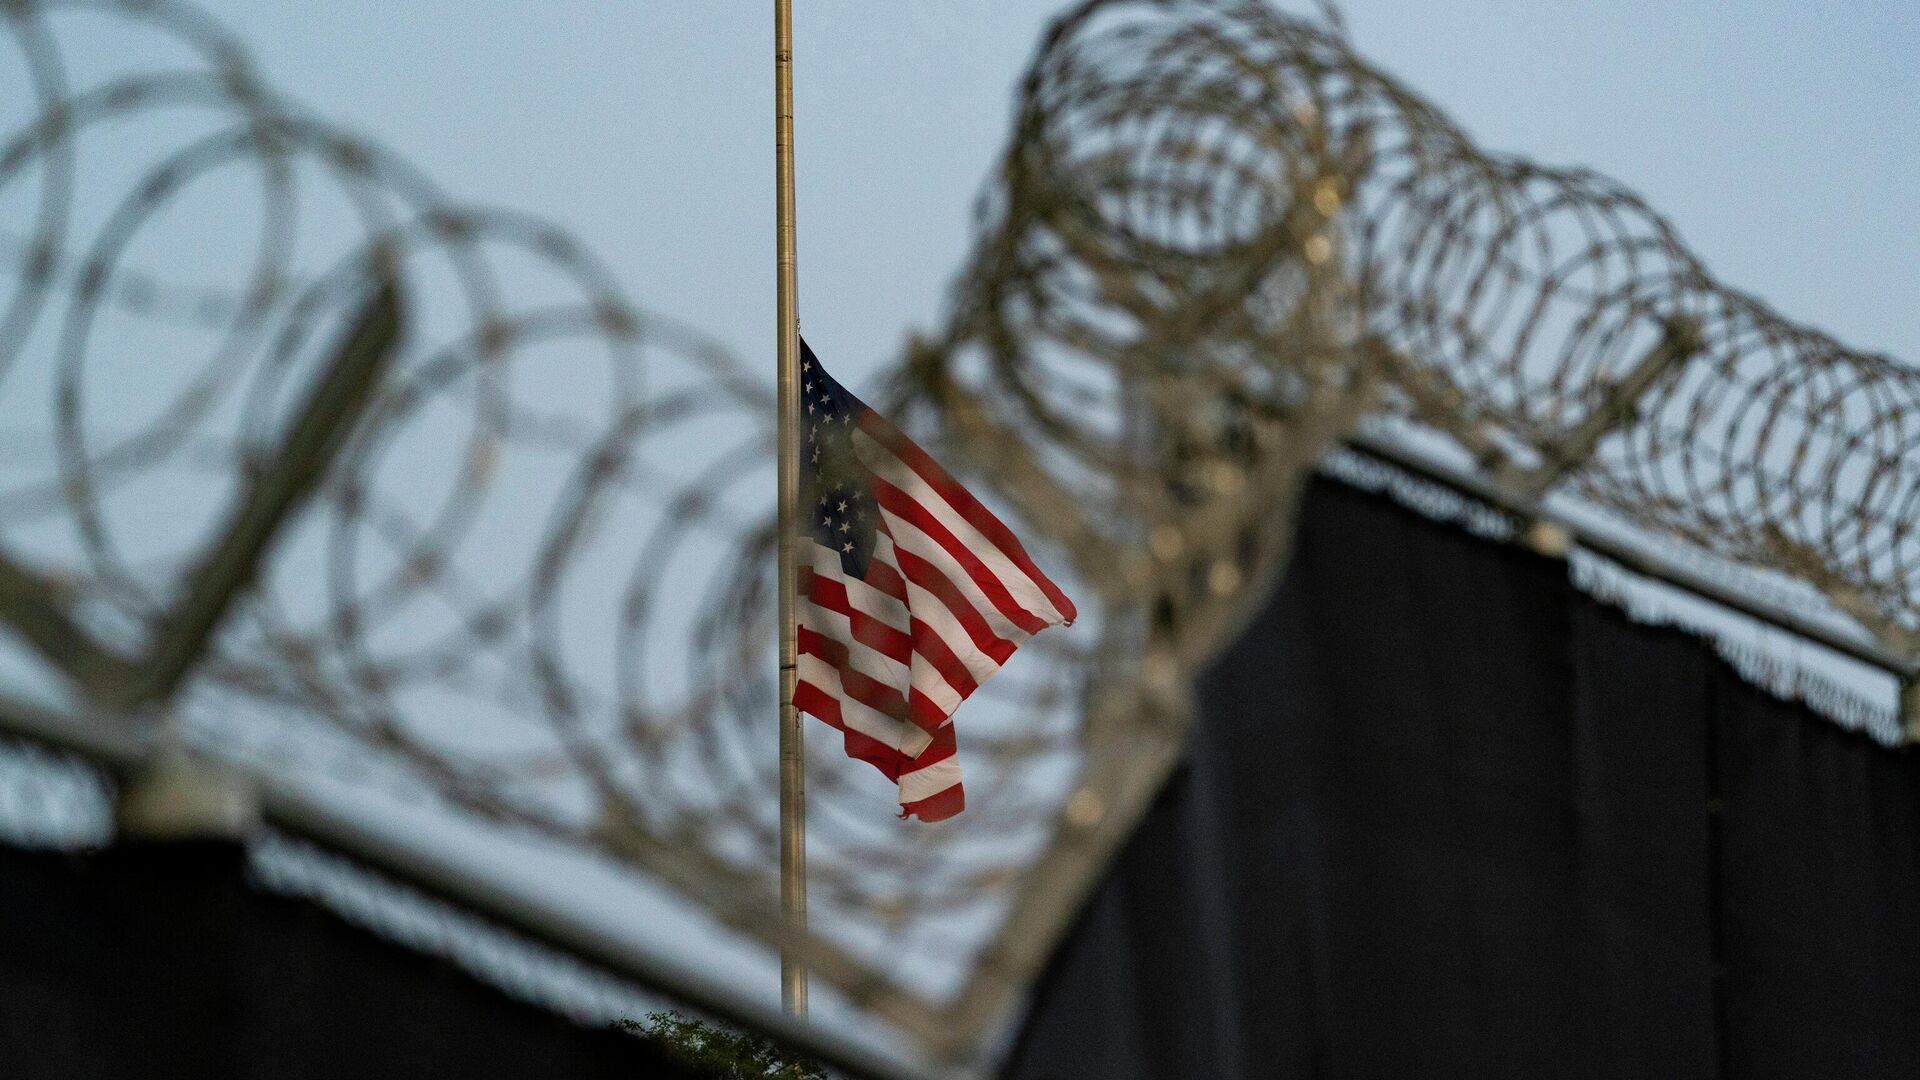 In this Aug. 29, 2021, file photo reviewed by U.S. military officials, a flag flies at half-staff in honor of the U.S. service members and other victims killed in the terrorist attack in Kabul, Afghanistan, as seen from Camp Justice in Guantanamo Bay Naval Base, Cuba. - Sputnik International, 1920, 05.02.2022